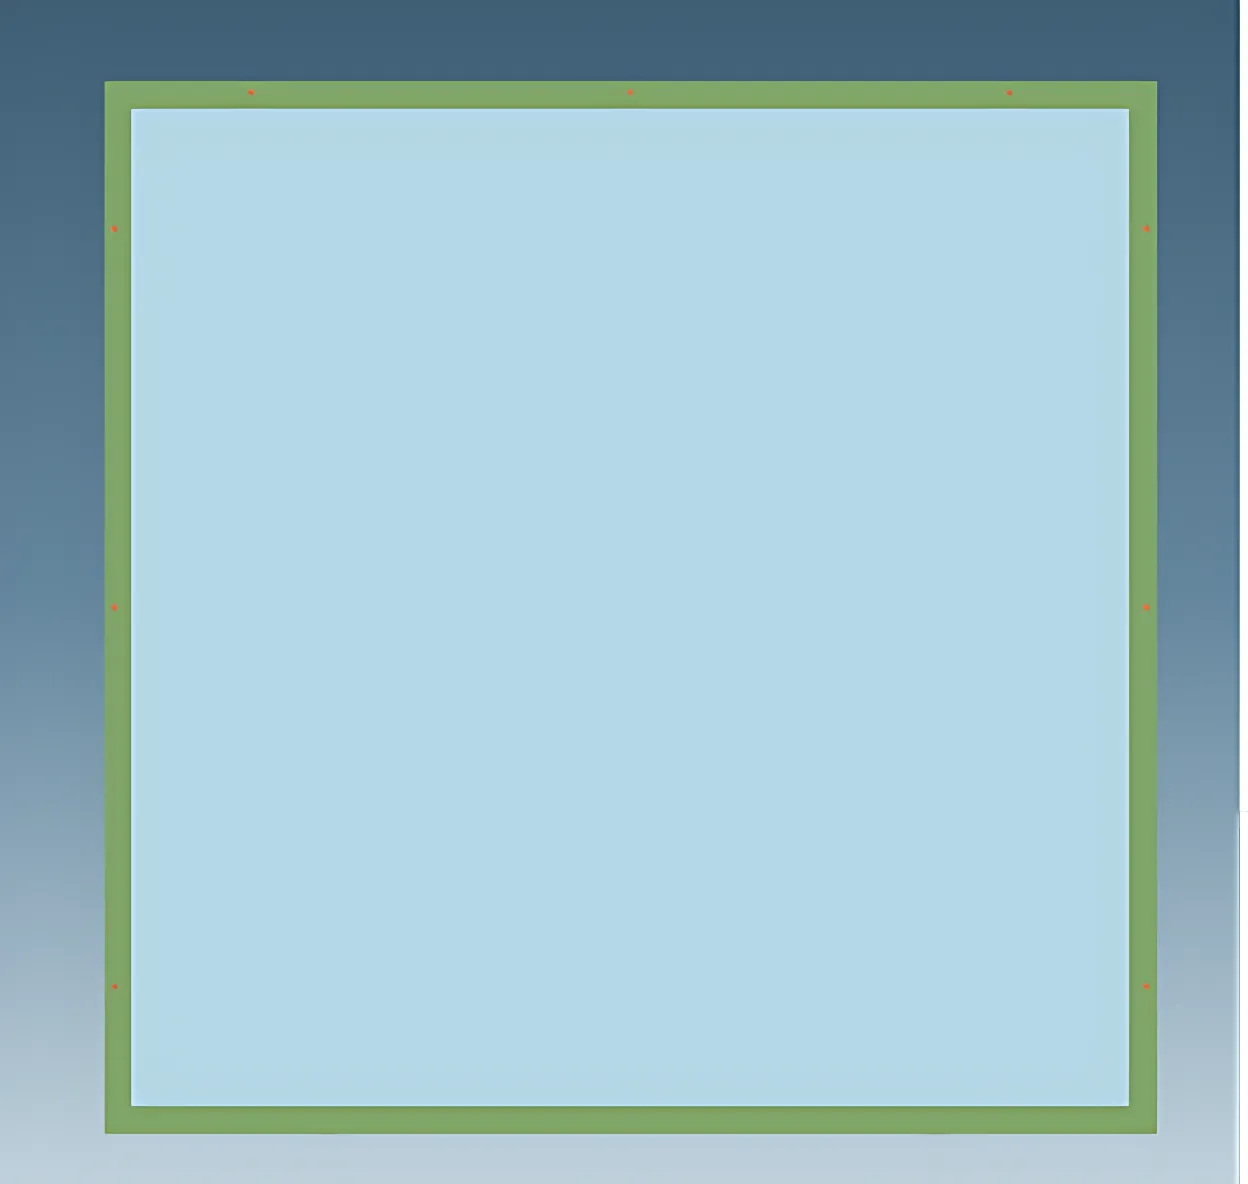 A square with green border on top of it.